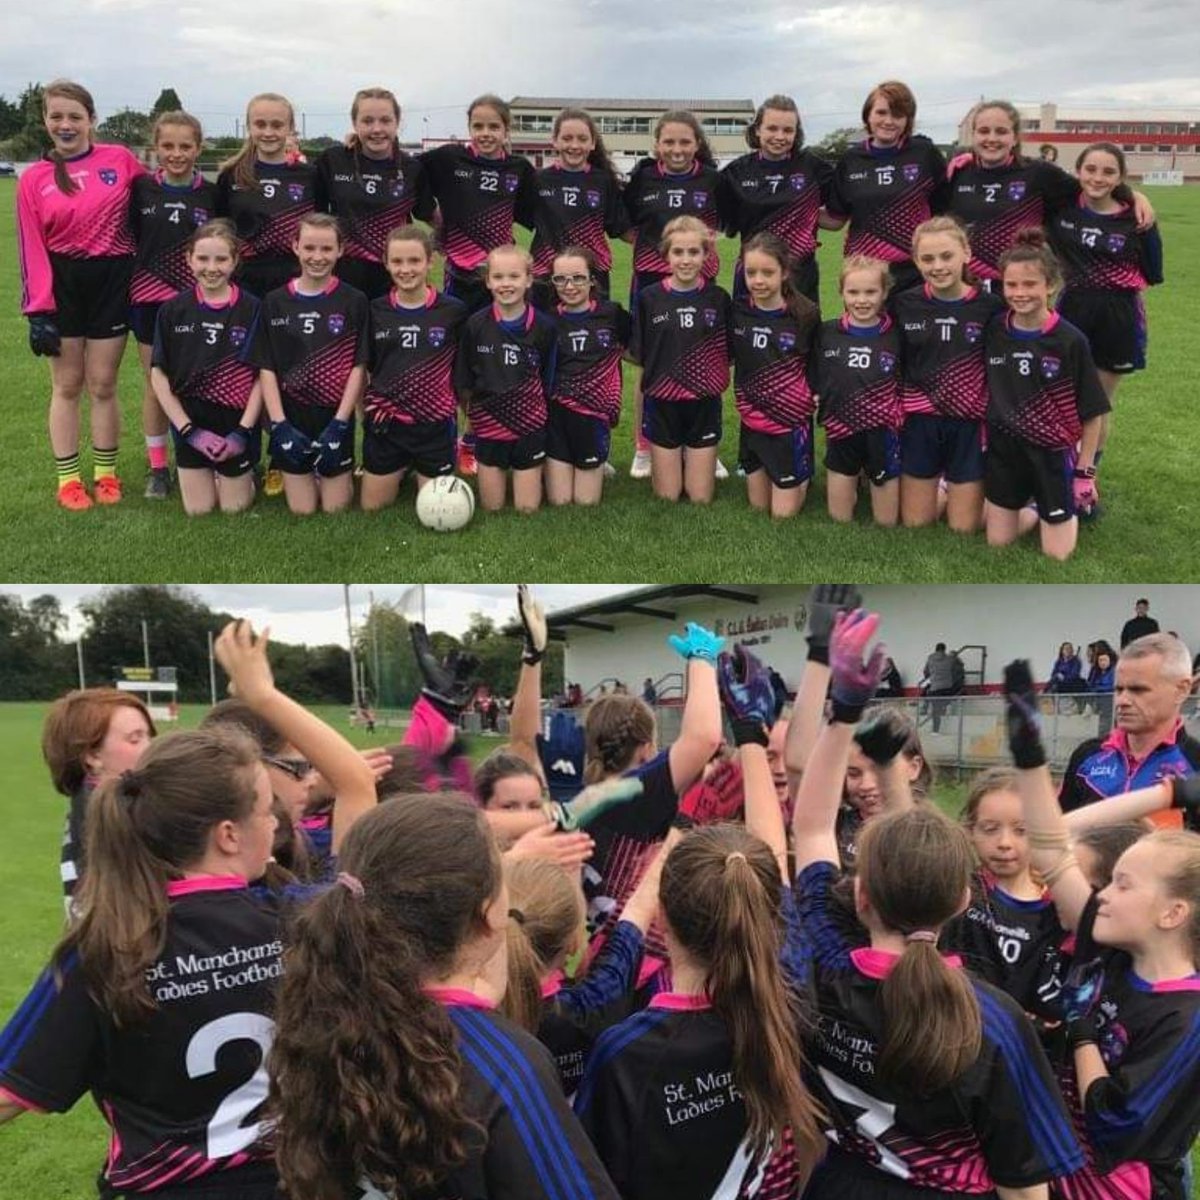 Throwback to 2 years ago! Our u12s after a great game in Edenderry! 🖤💙💗 #StManchansLadiesFootball